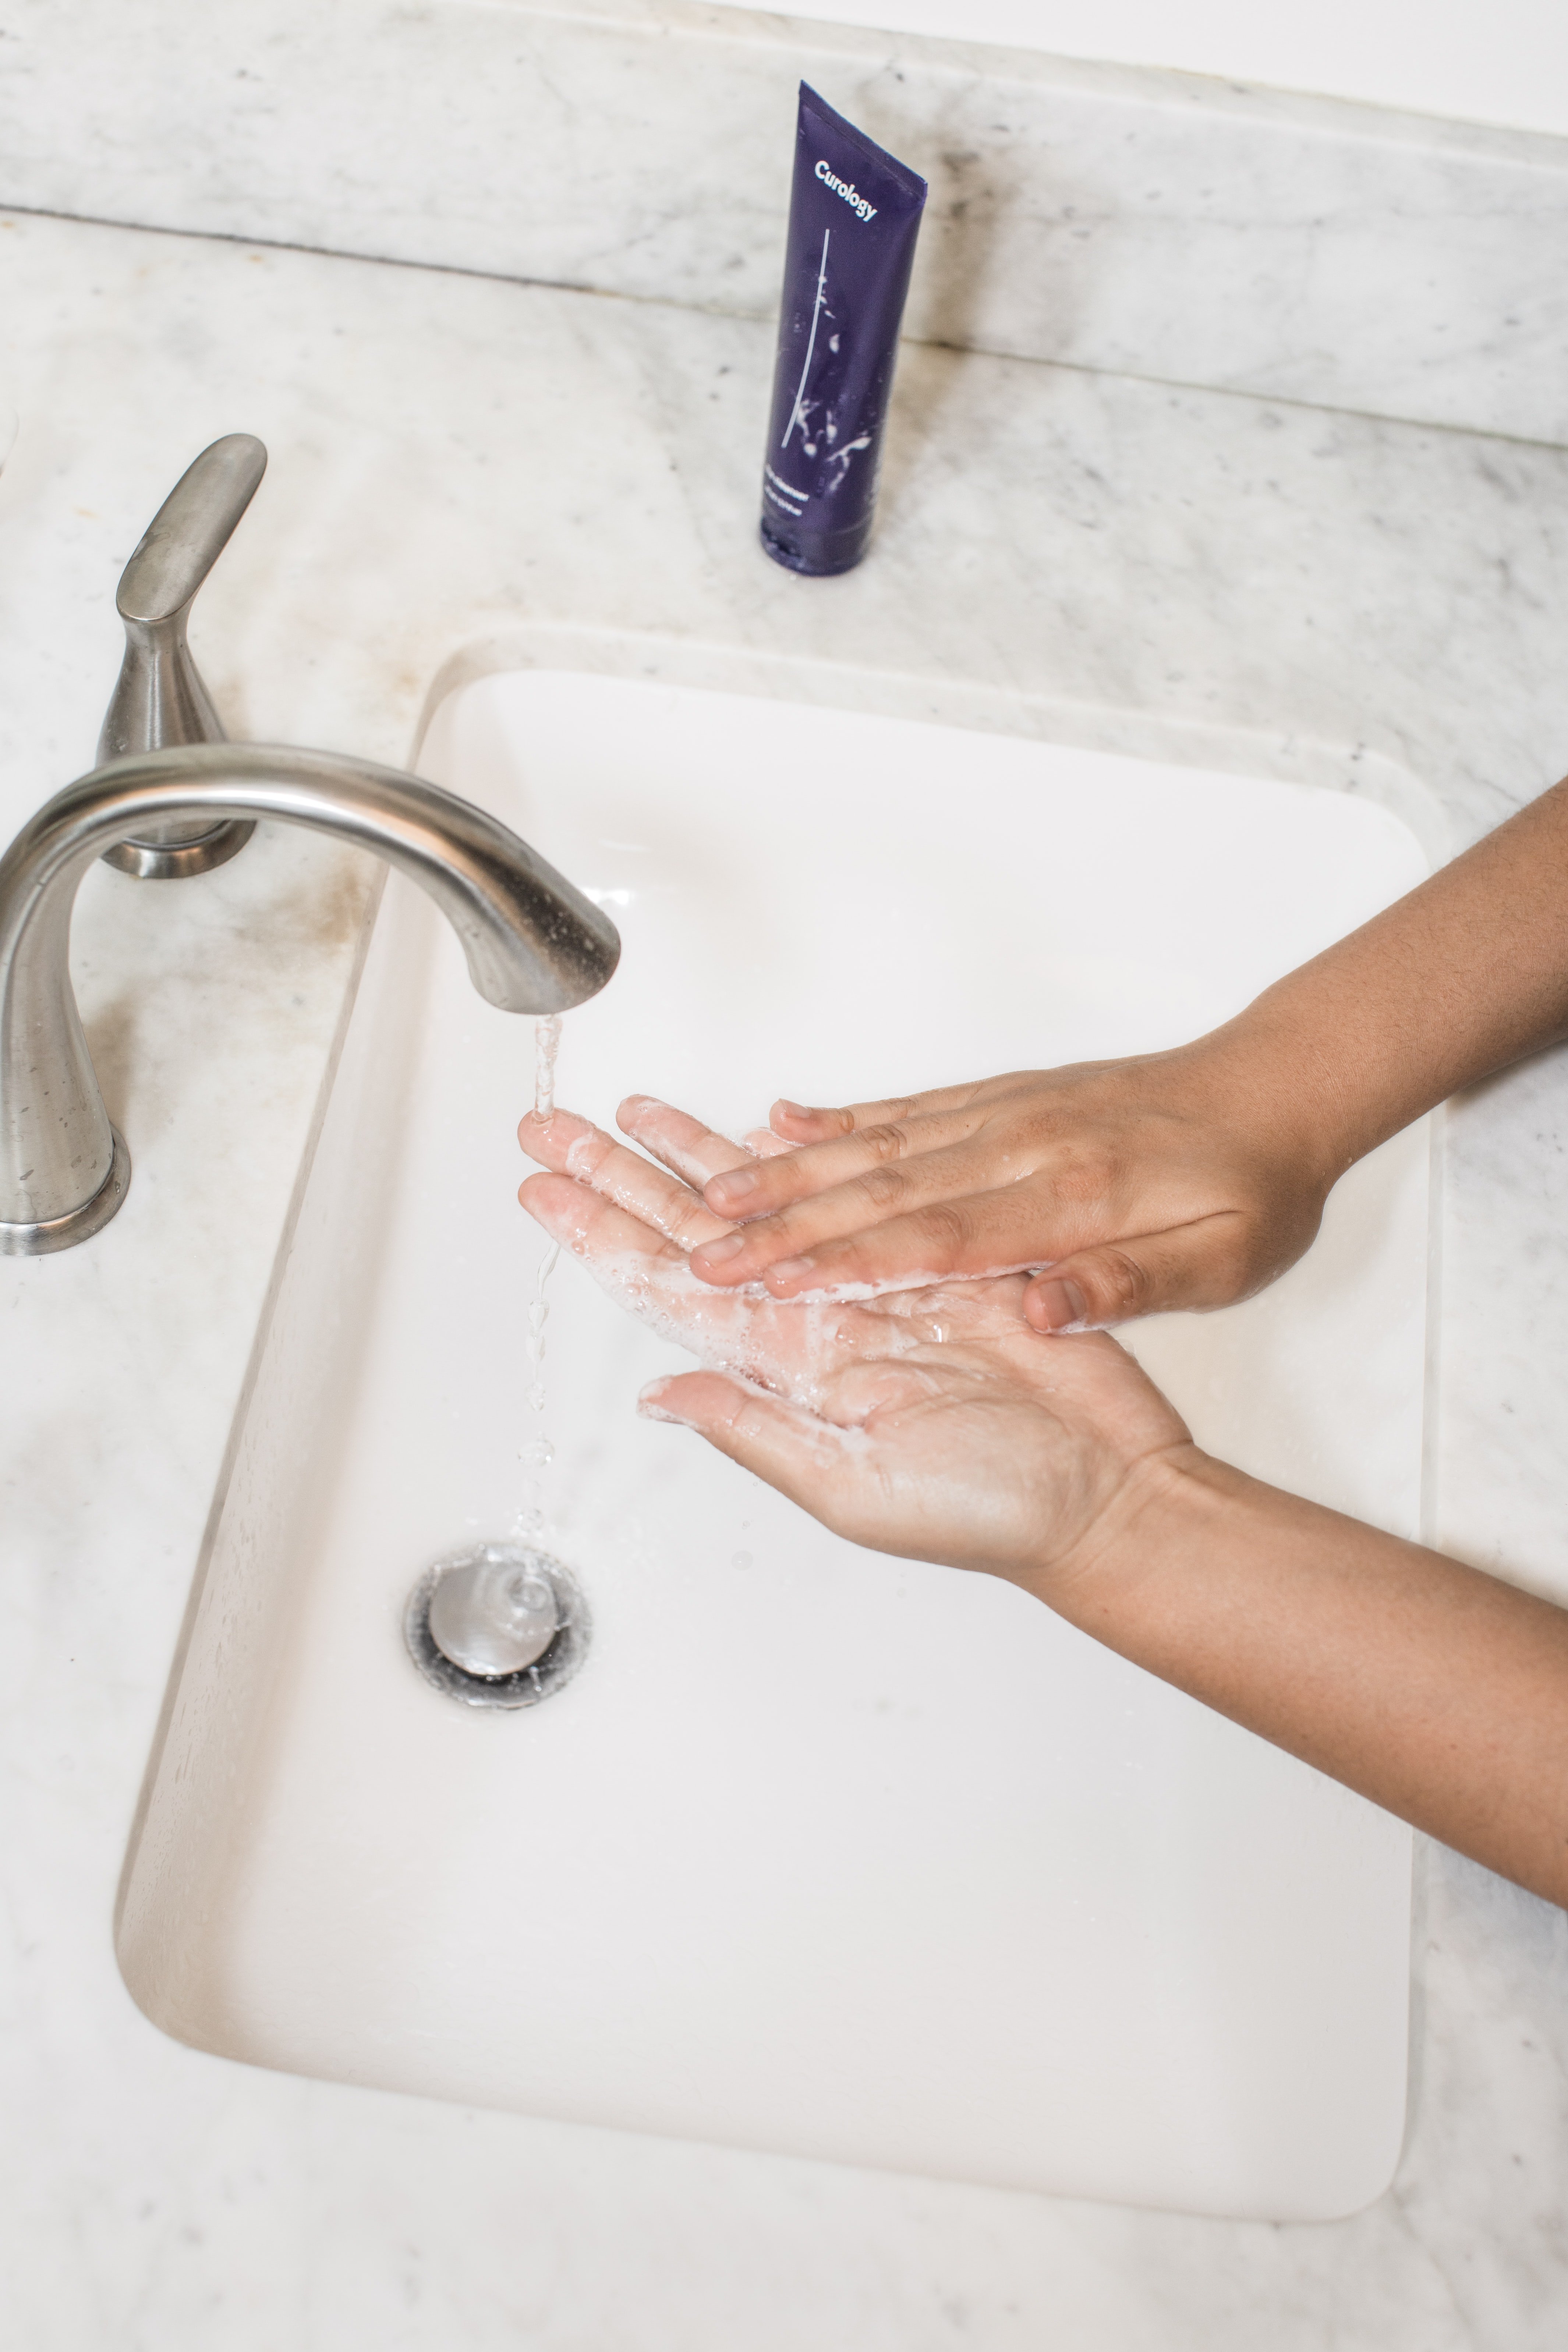 7 of the Best Morning Cleansers